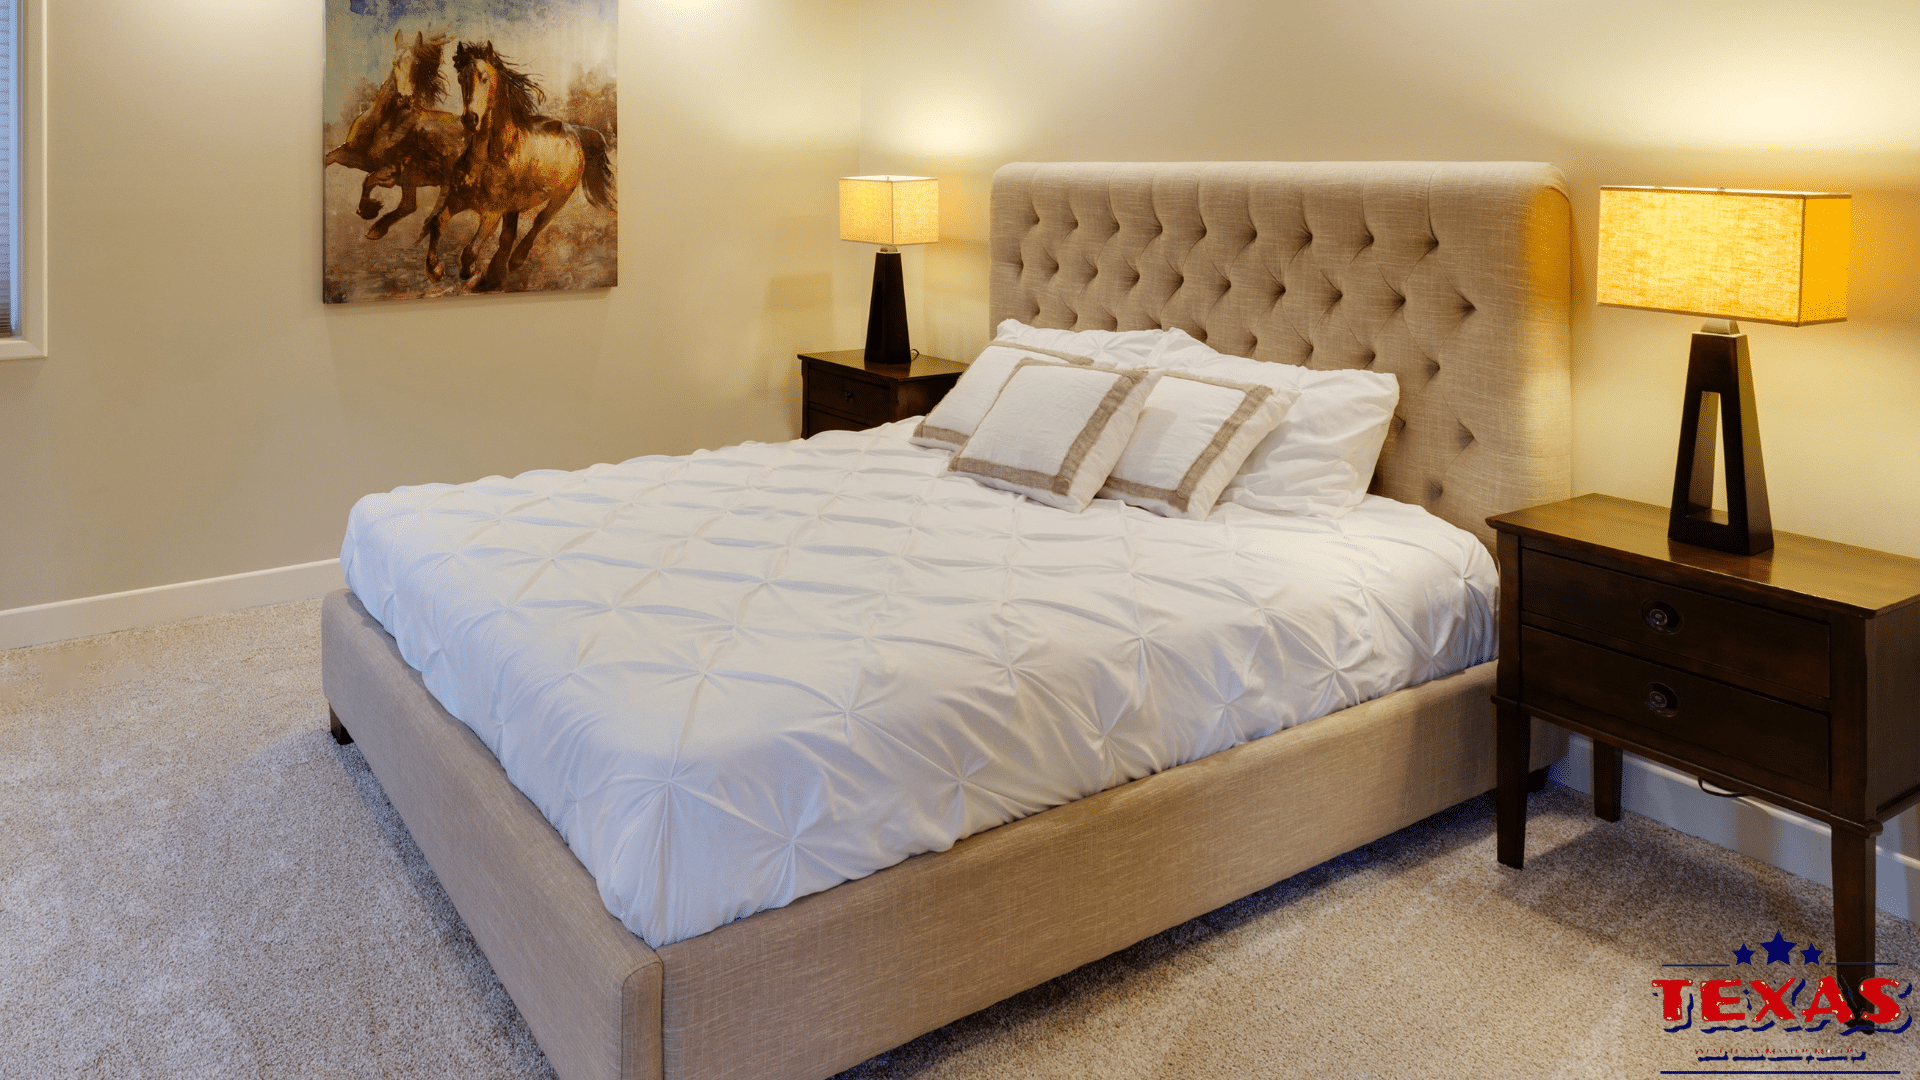 Mattress & Bed Movers Companies in Lubbock Texas